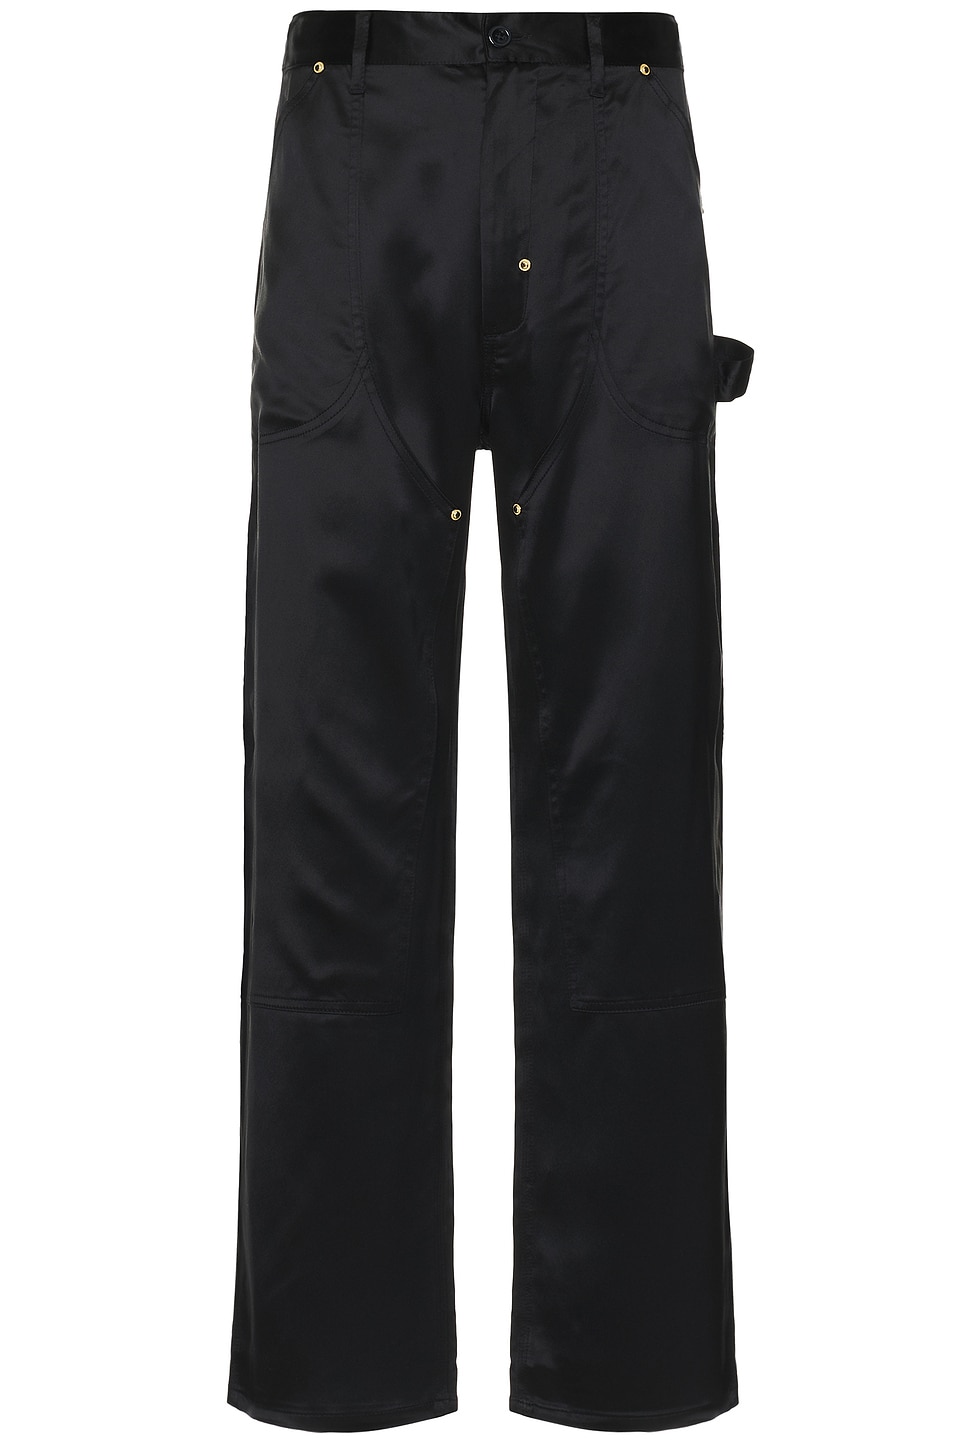 Image 1 of 4SDESIGNS Front Face Silk Utility Pant in Black